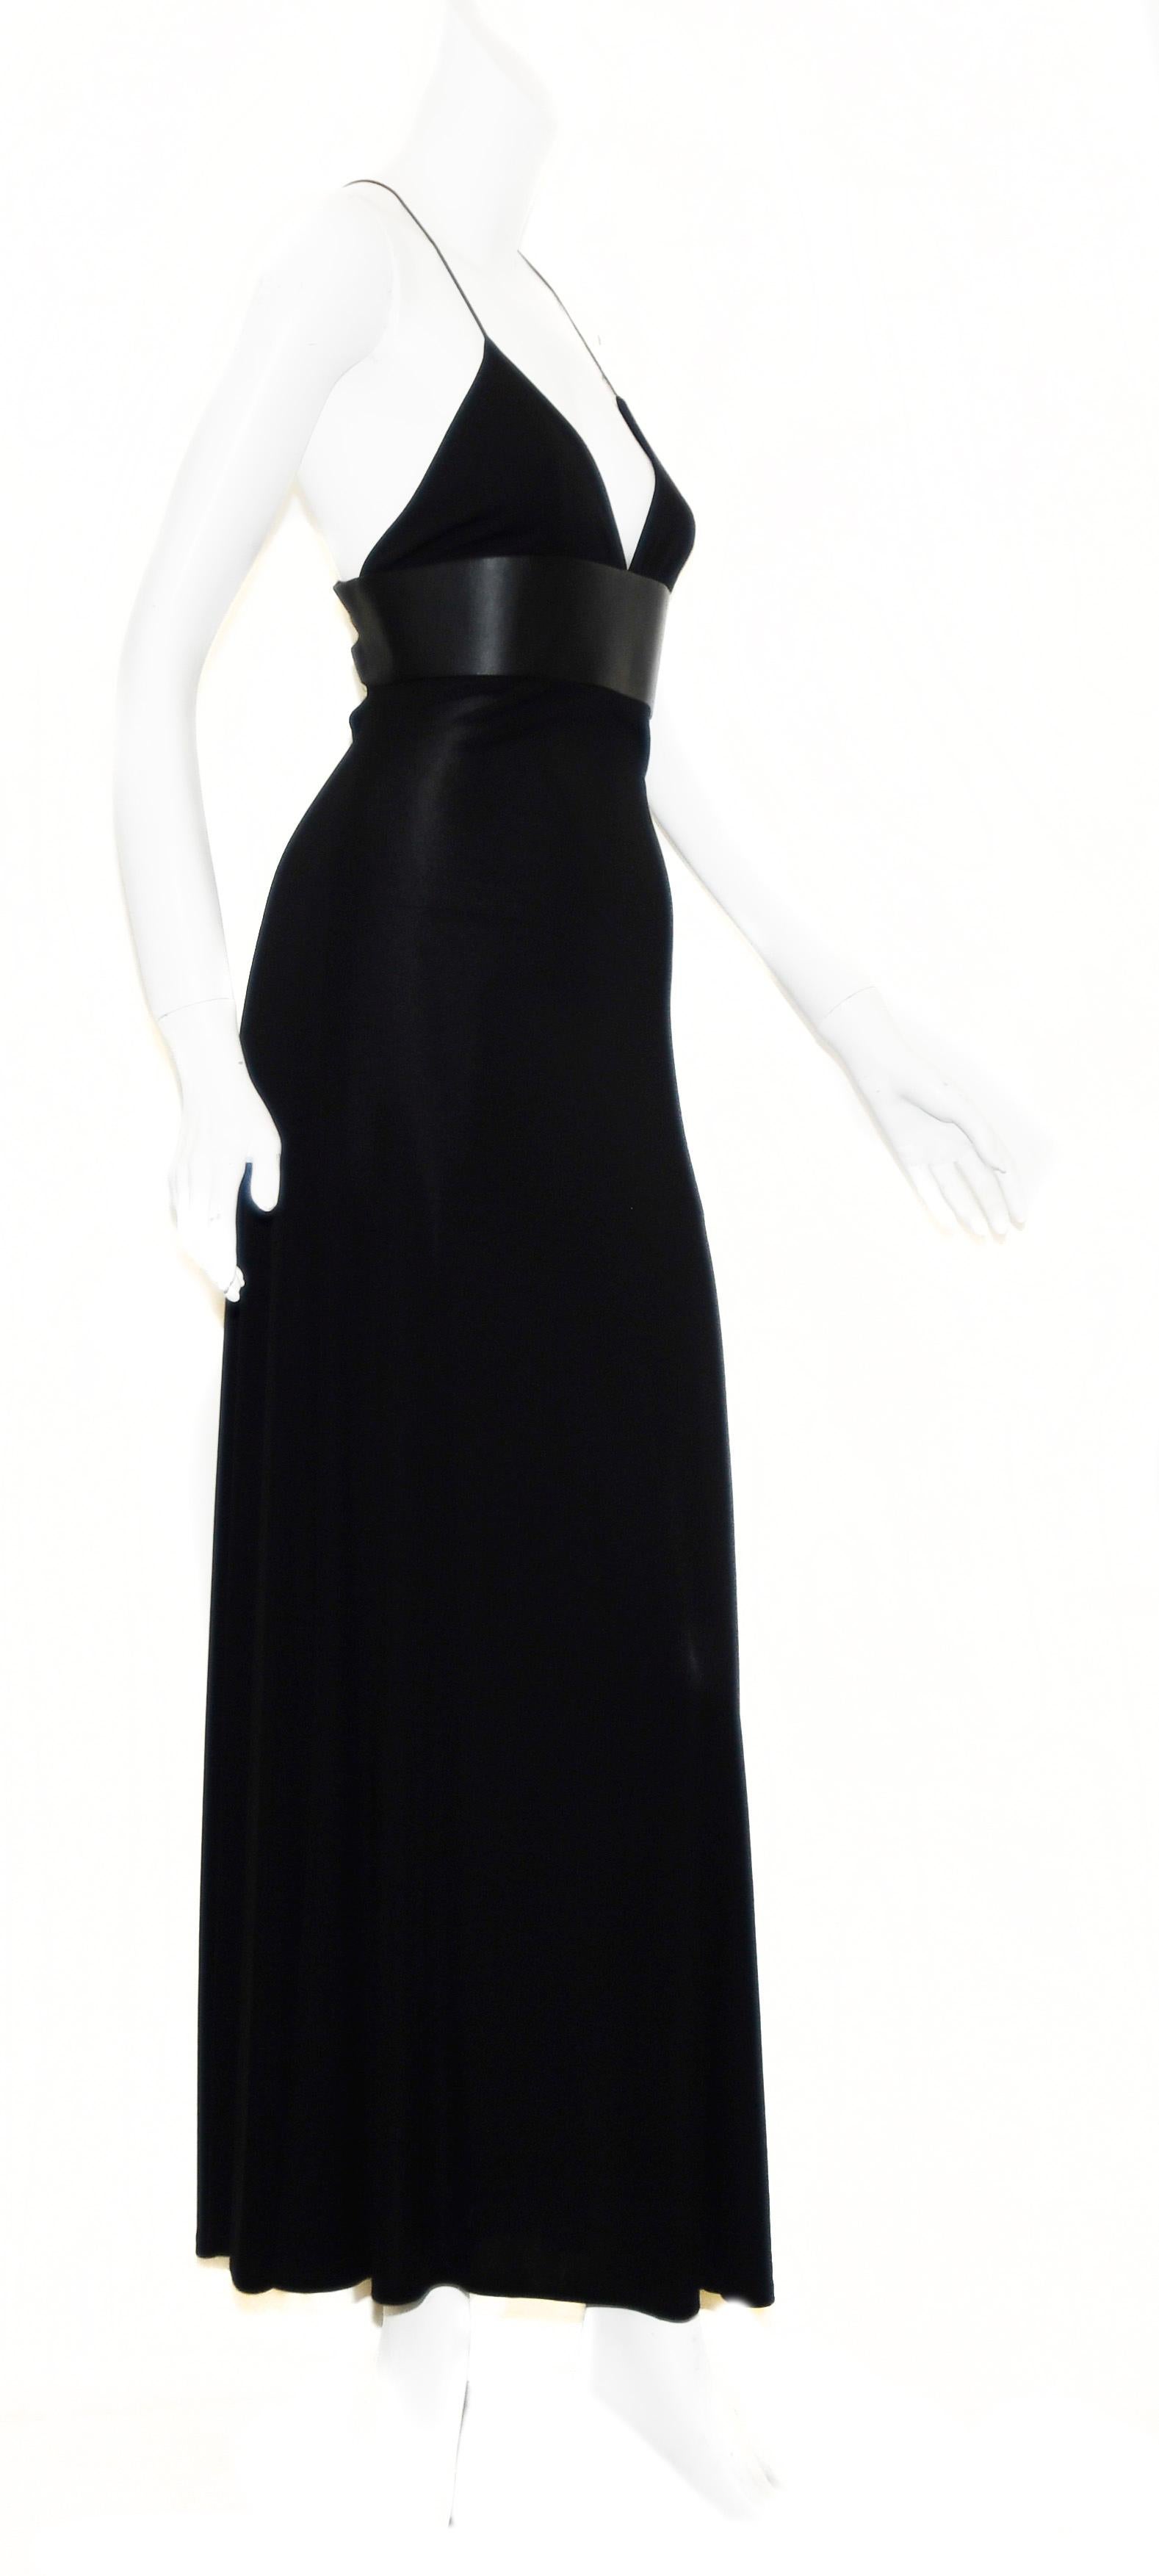 Margaretha and Wolfgang Ley debuted their company in the late 1970s, and named it for a racehorse that proved lucky for them, Escada. The German line soon established a reputation for distinctive, well-made clothes. This contemporary long dress with